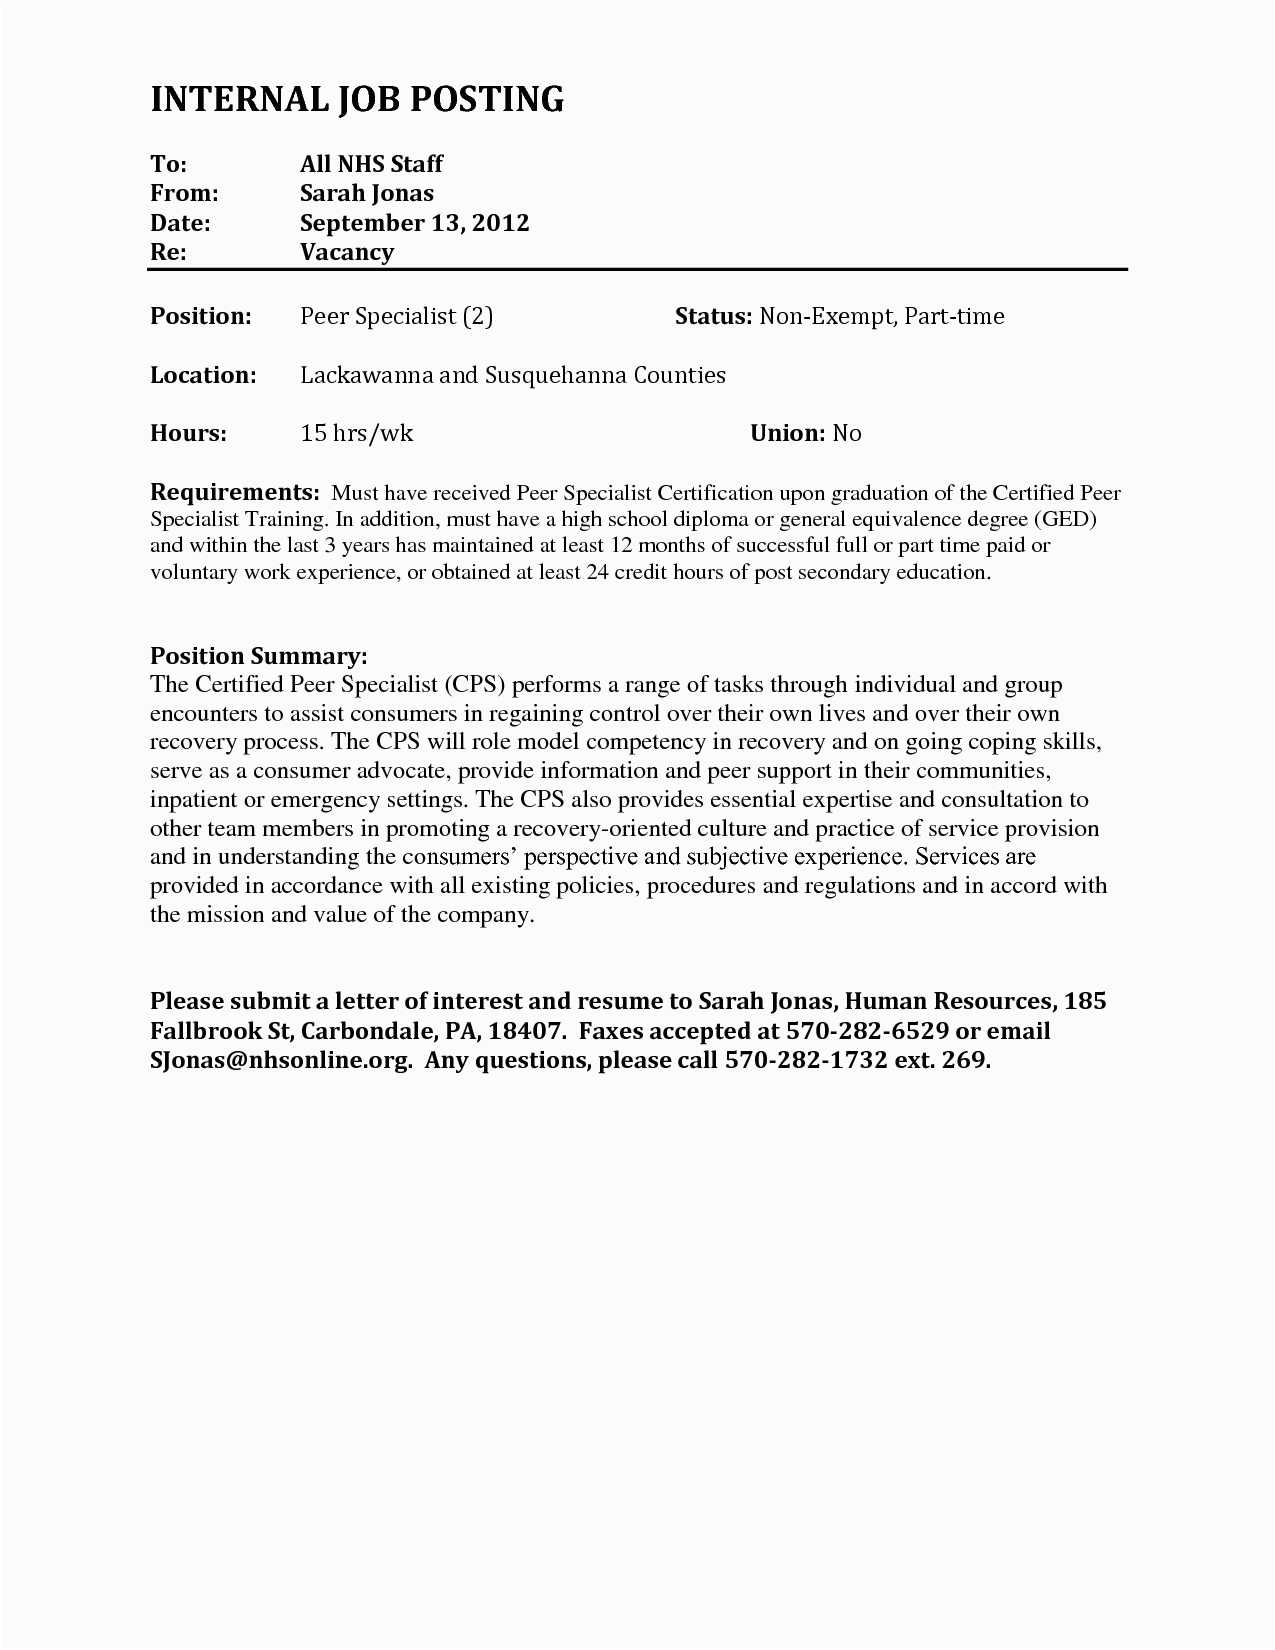 Resume Template for Internal Job Posting New What is A Letter Interest for A Job